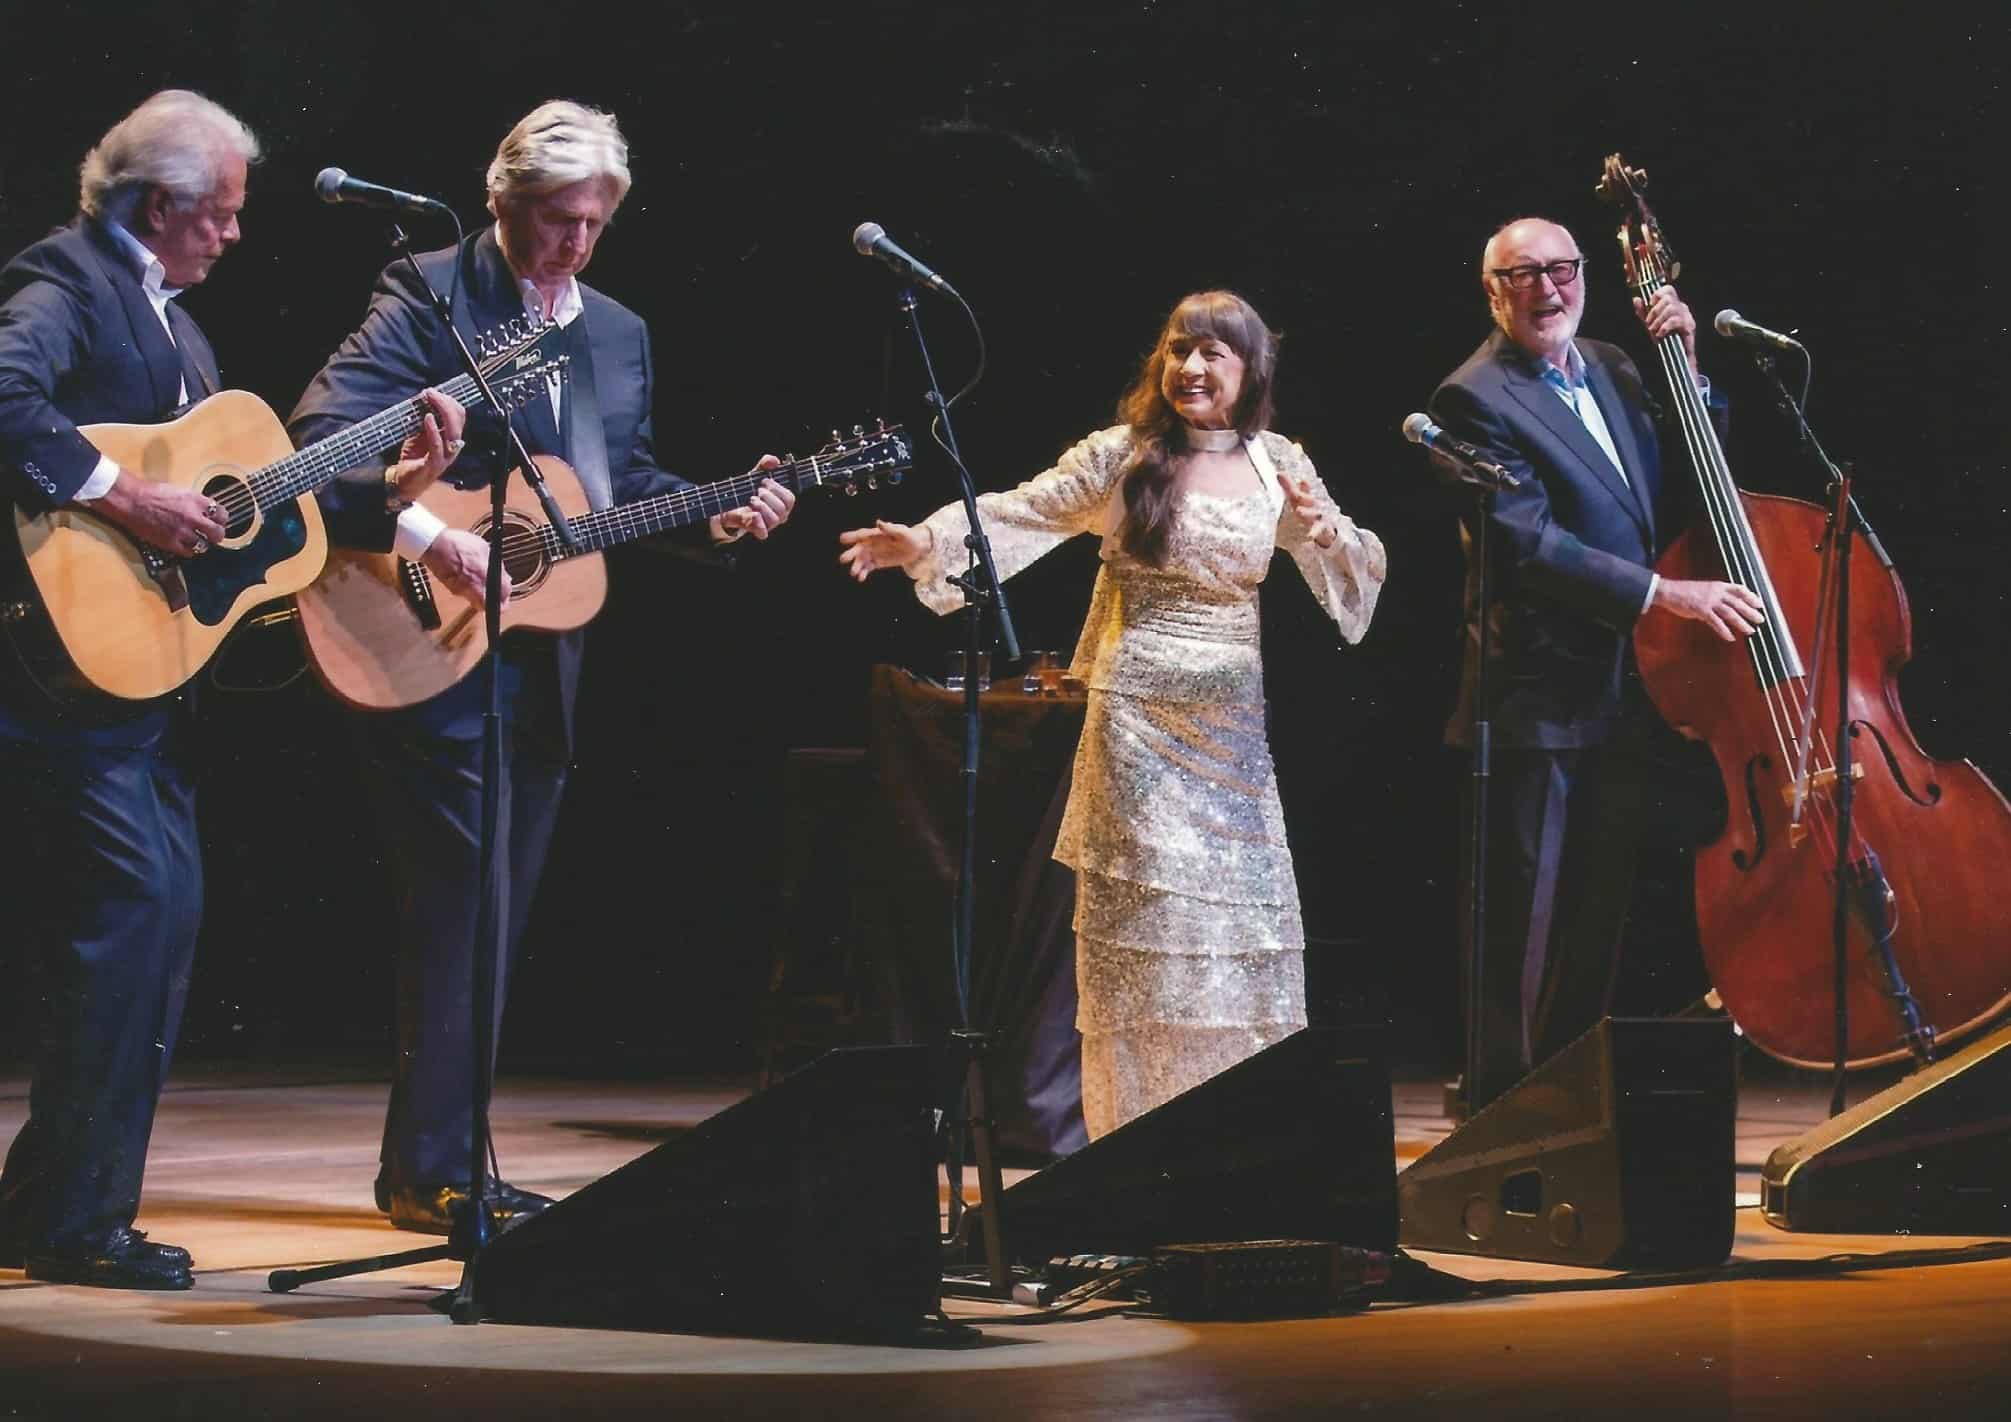 3. The Seekers onstage in the UK in 2014 during their sold-out Golden Jubilee tour.